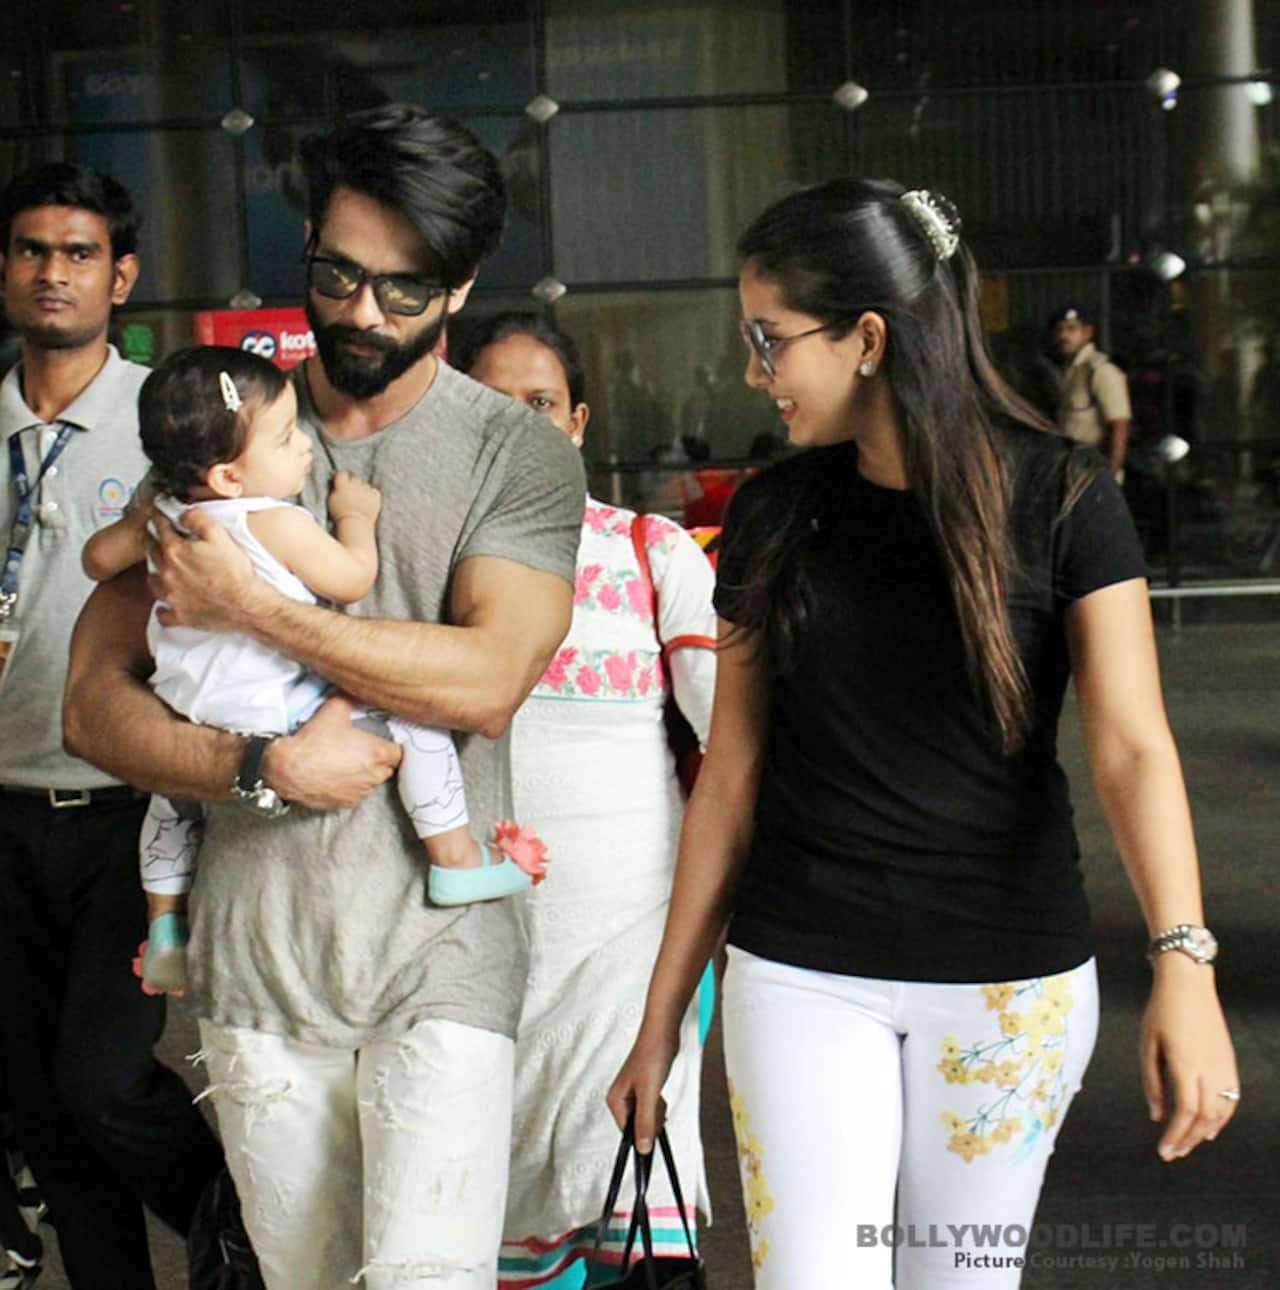 This is how Shahid Kapoor and Mira Plan plan on celebrating Misha's first birthday